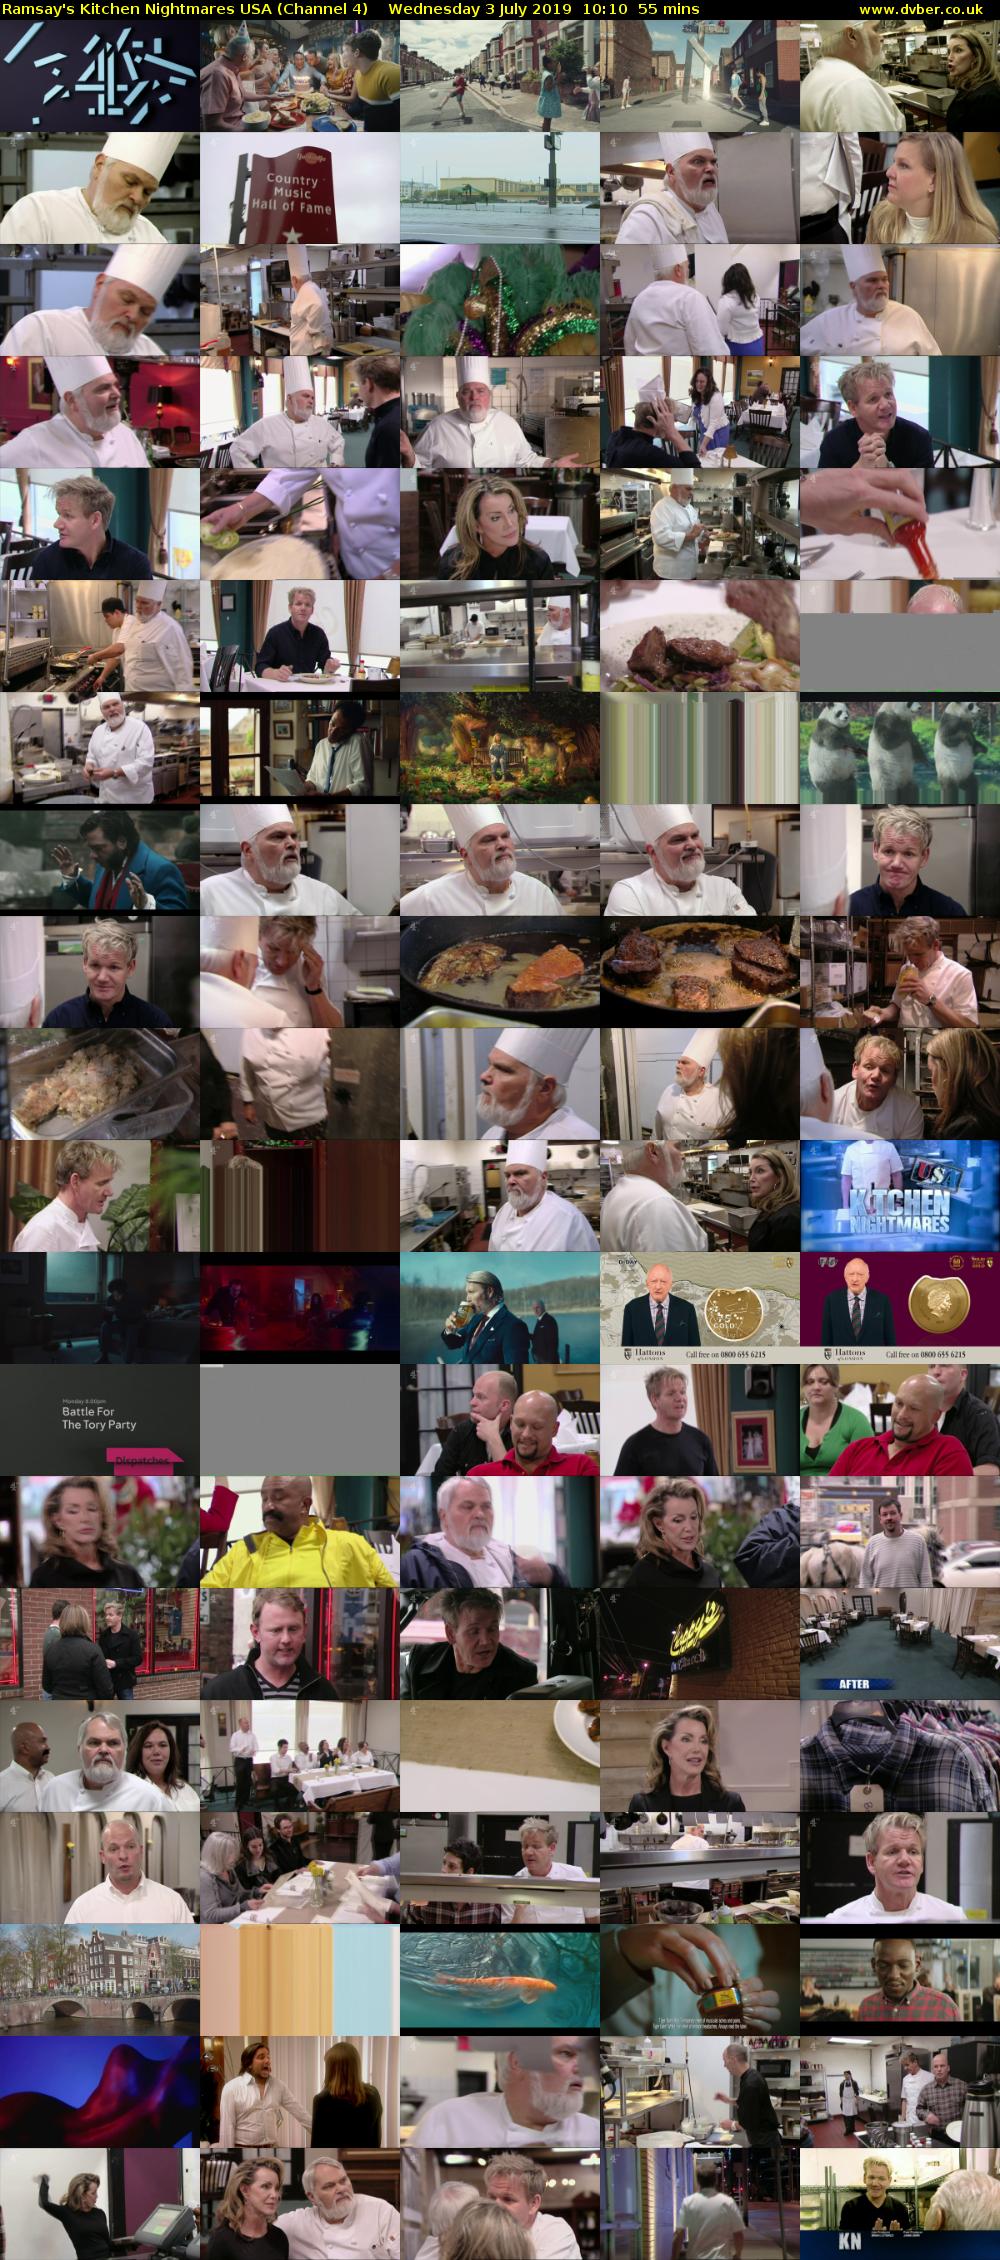 Ramsay's Kitchen Nightmares USA (Channel 4) Wednesday 3 July 2019 10:10 - 11:05